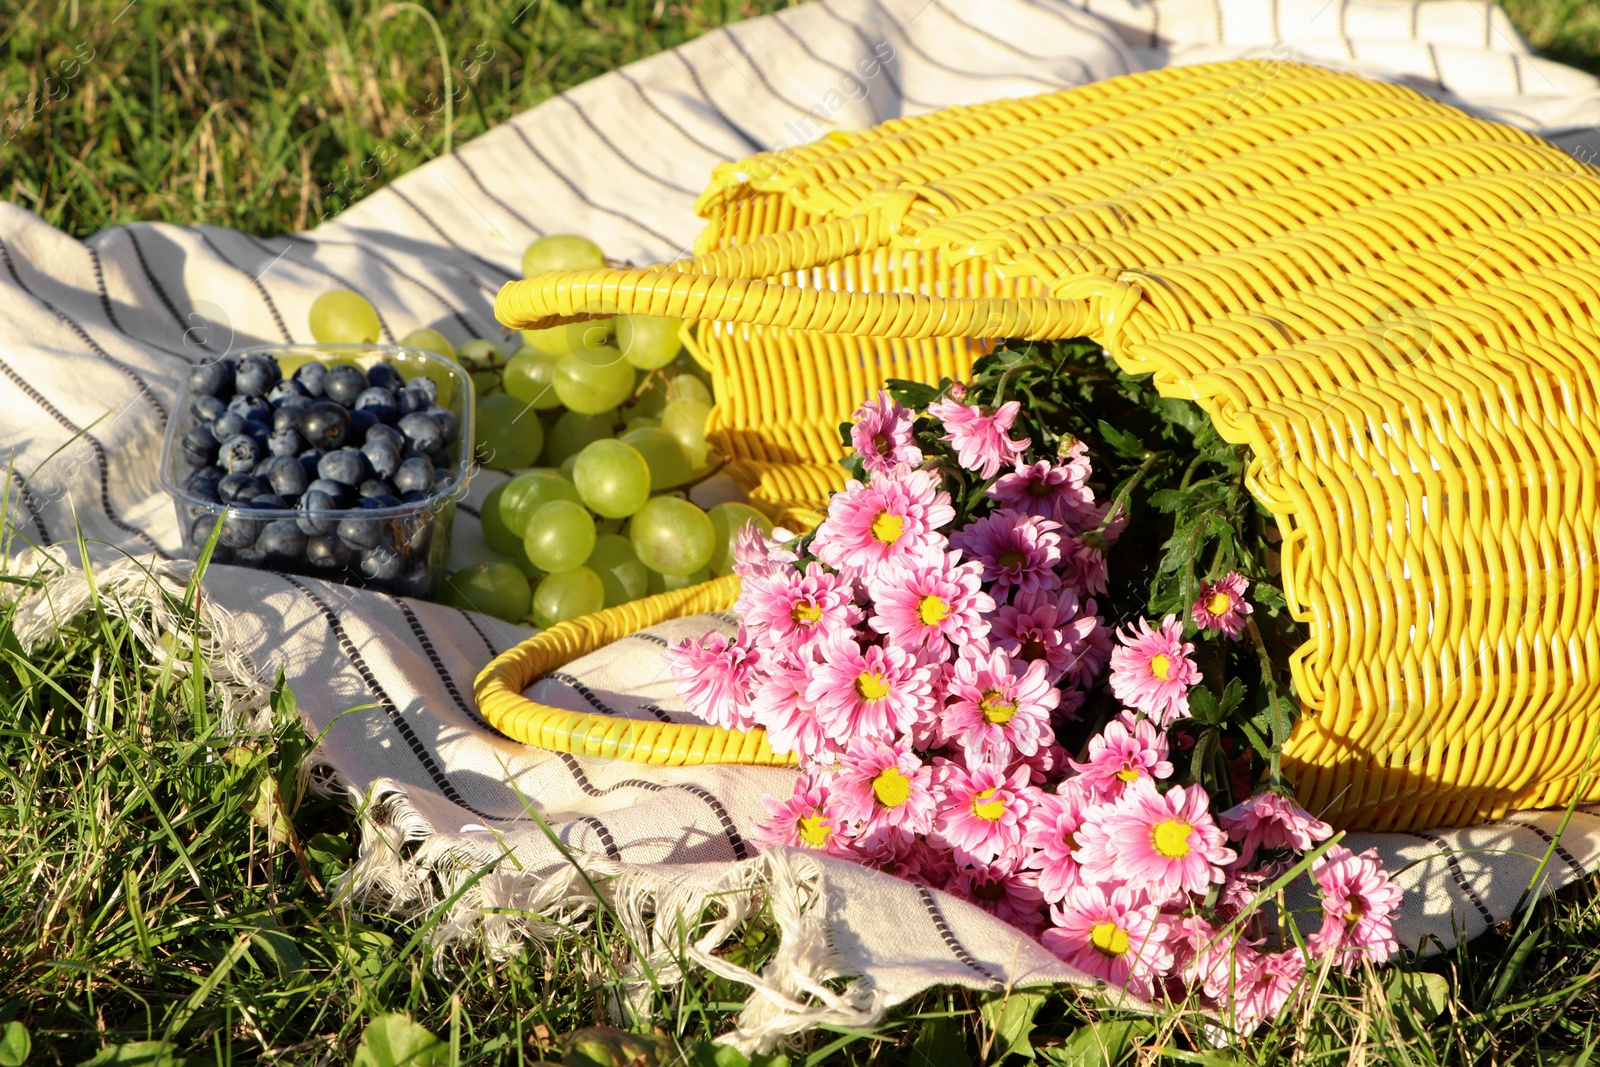 Photo of Yellow wicker bag with beautiful flowers, grapes and blueberries on picnic blanket outdoors, closeup